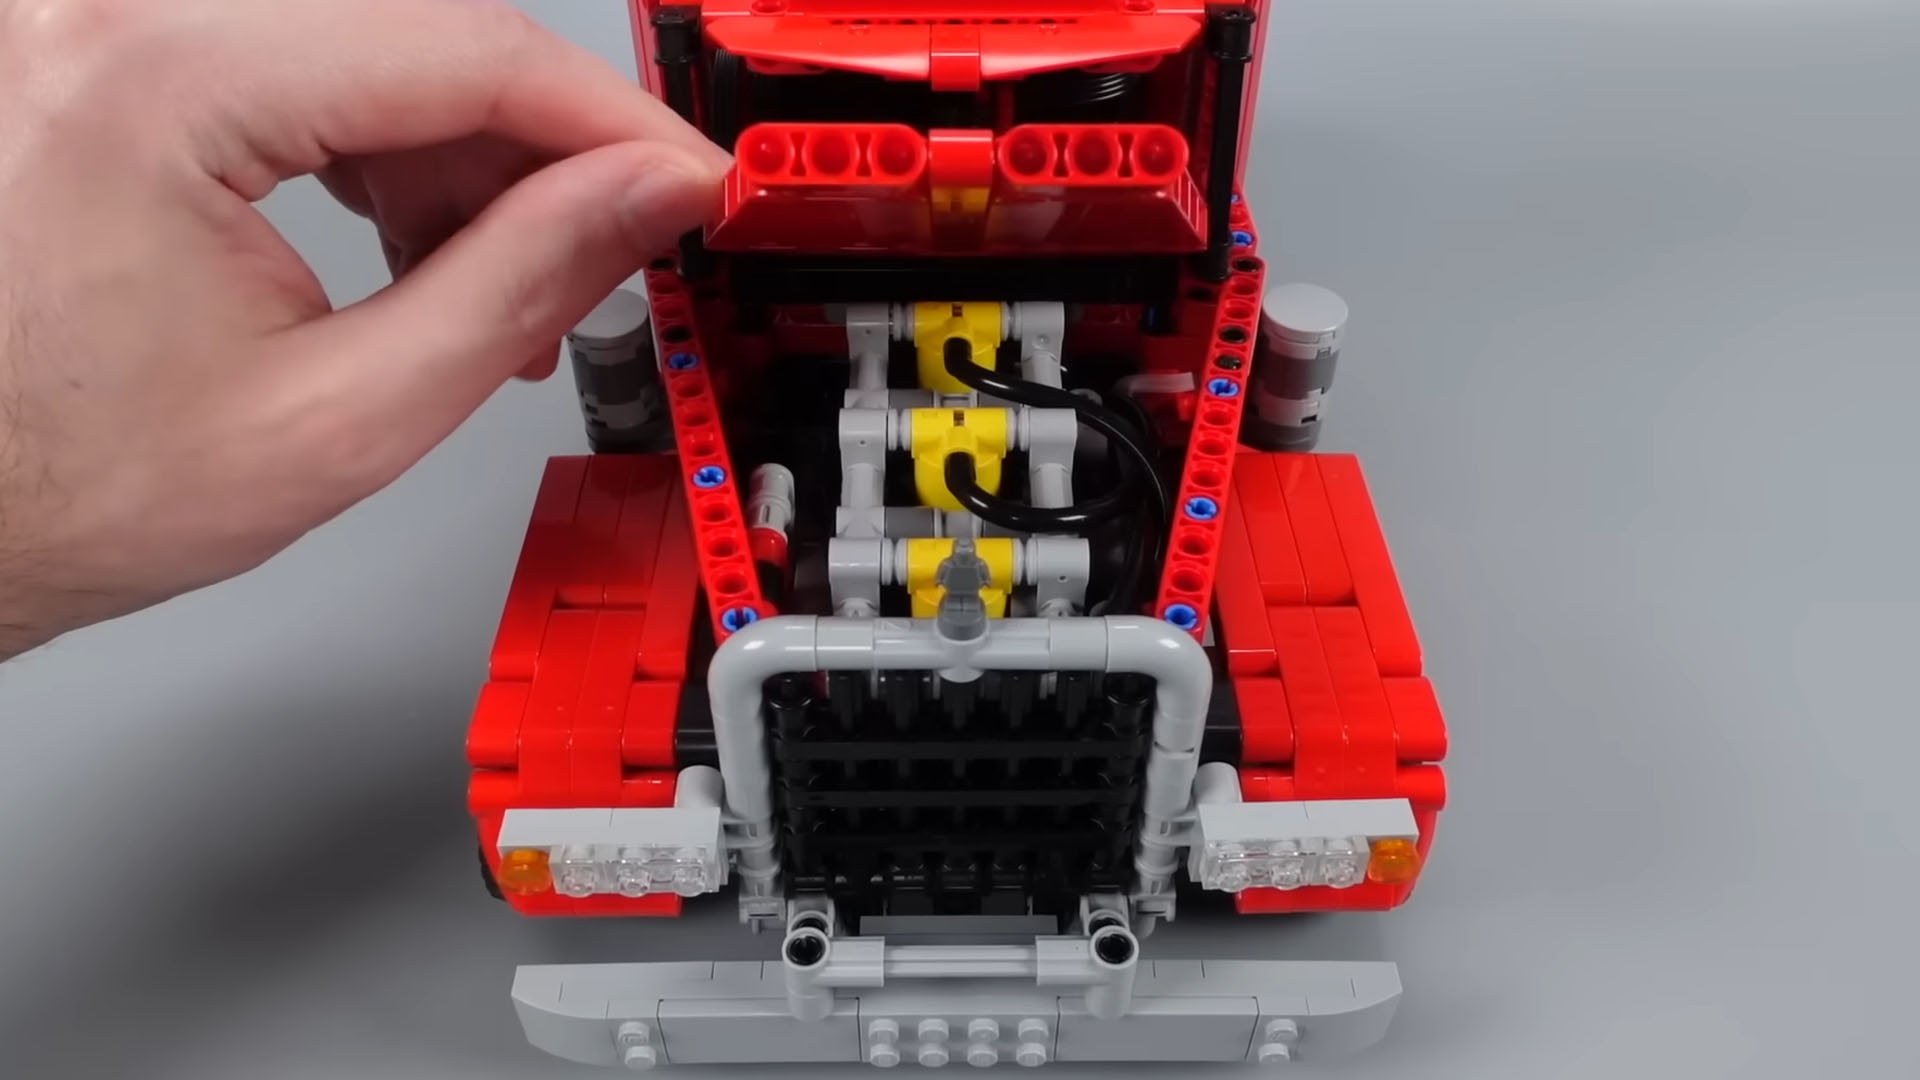 Watch This Air-Powered Lego Truck Run Well With a Three-Cylinder Engine